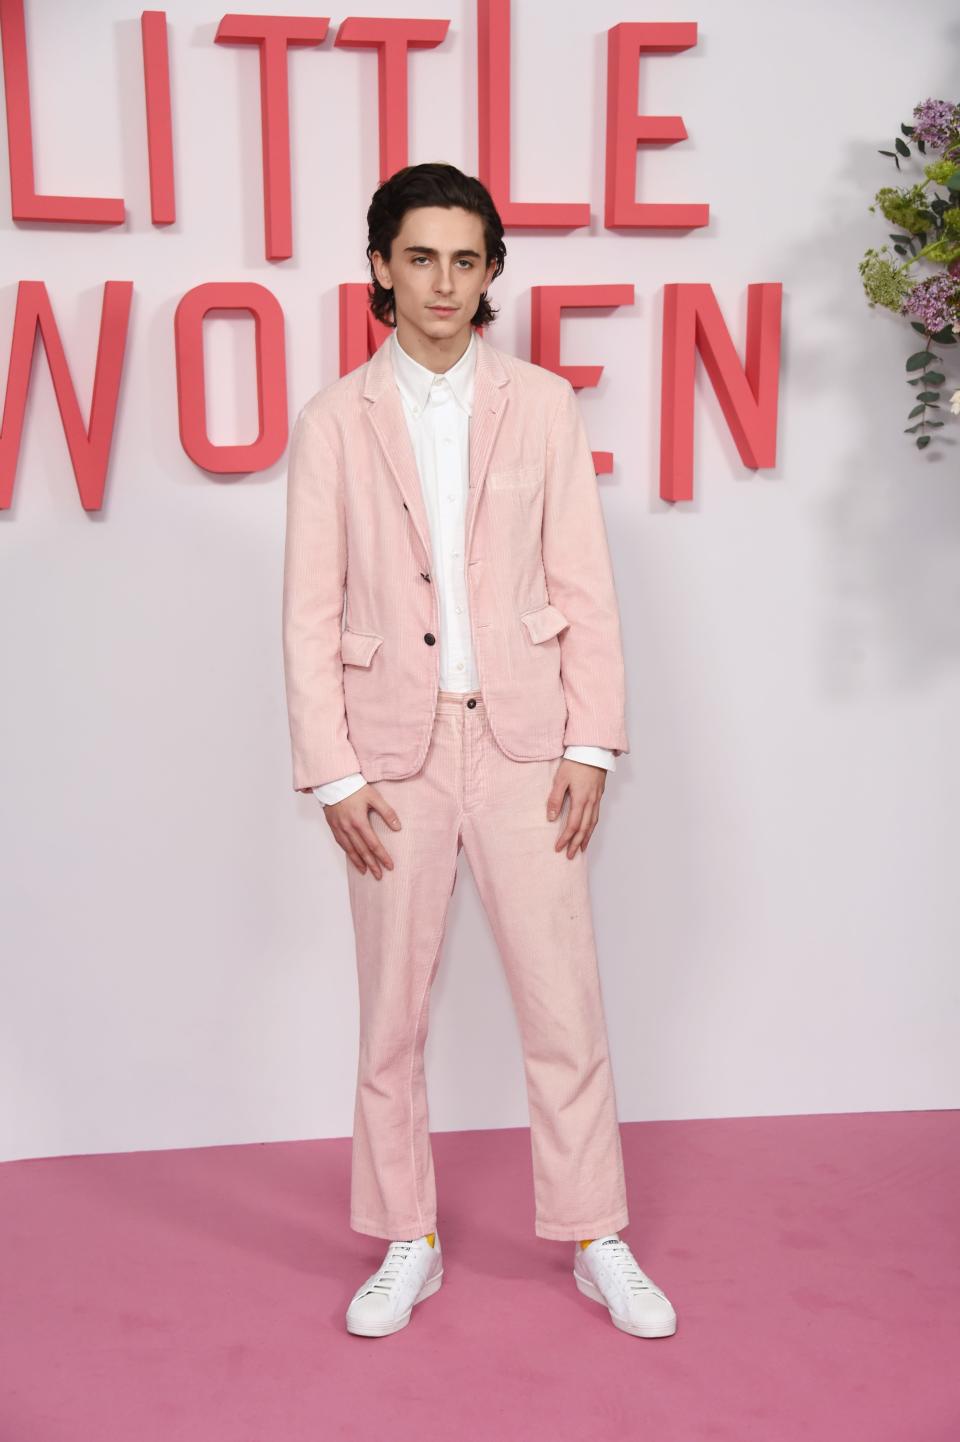 Timothee Chalamet poses at the evening photocall for "Little Women"